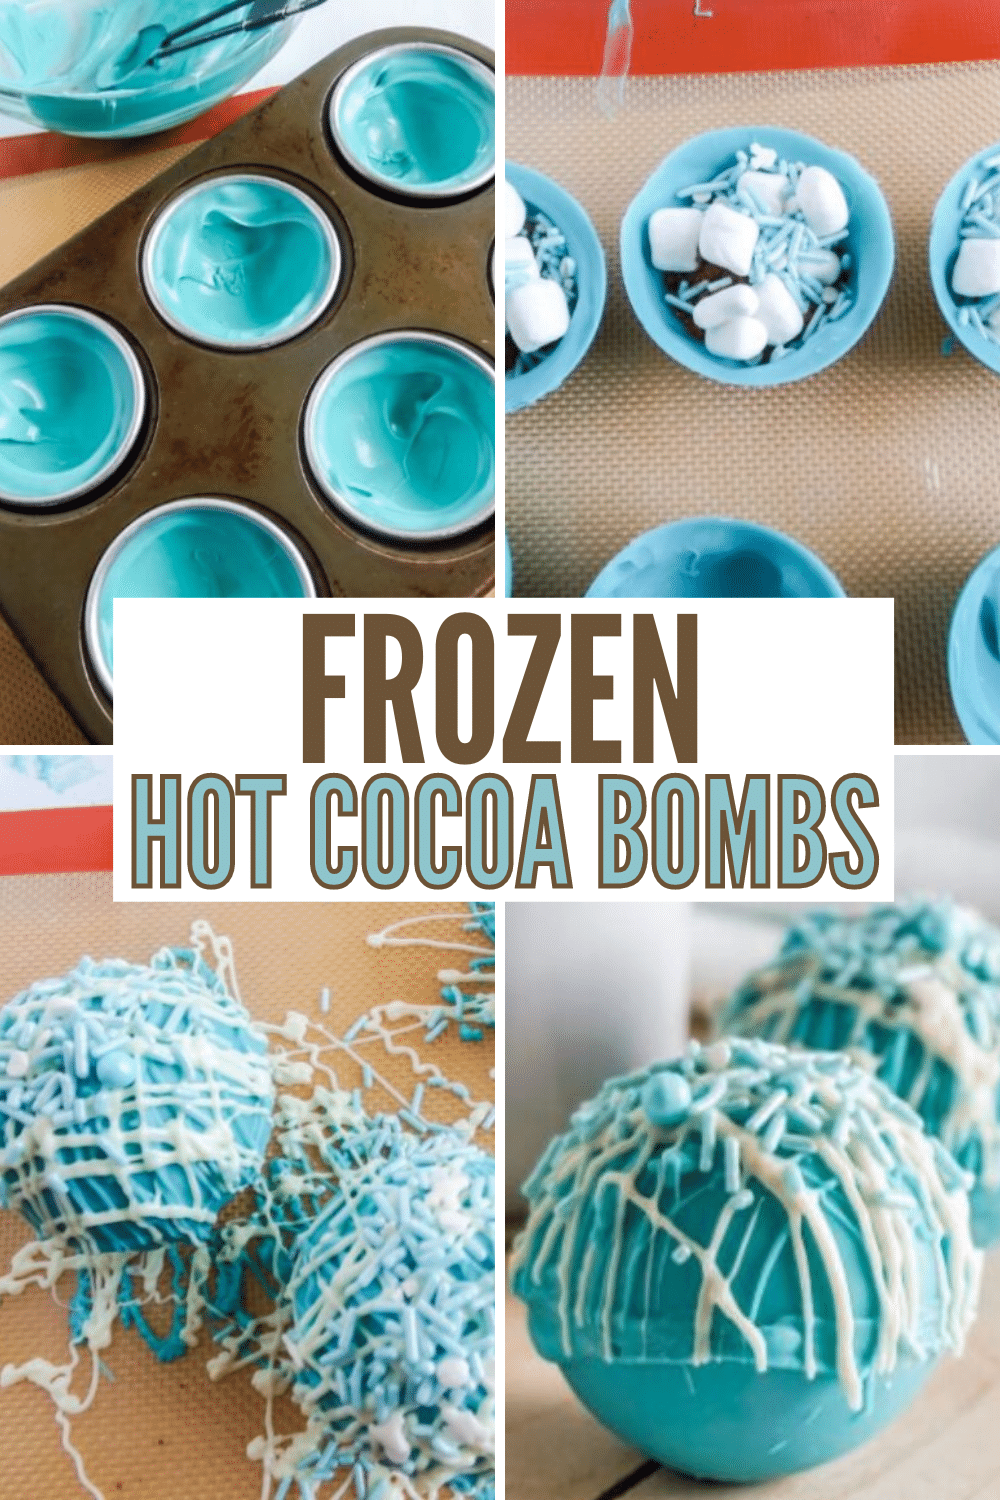 These Frozen Hot Cocoa Bombs are so simple to make! They use just 6 easy ingredients and are full of flavor and surprises! #frozen #hotcocoabombs #hotcocoa #dessert via @wondermomwannab